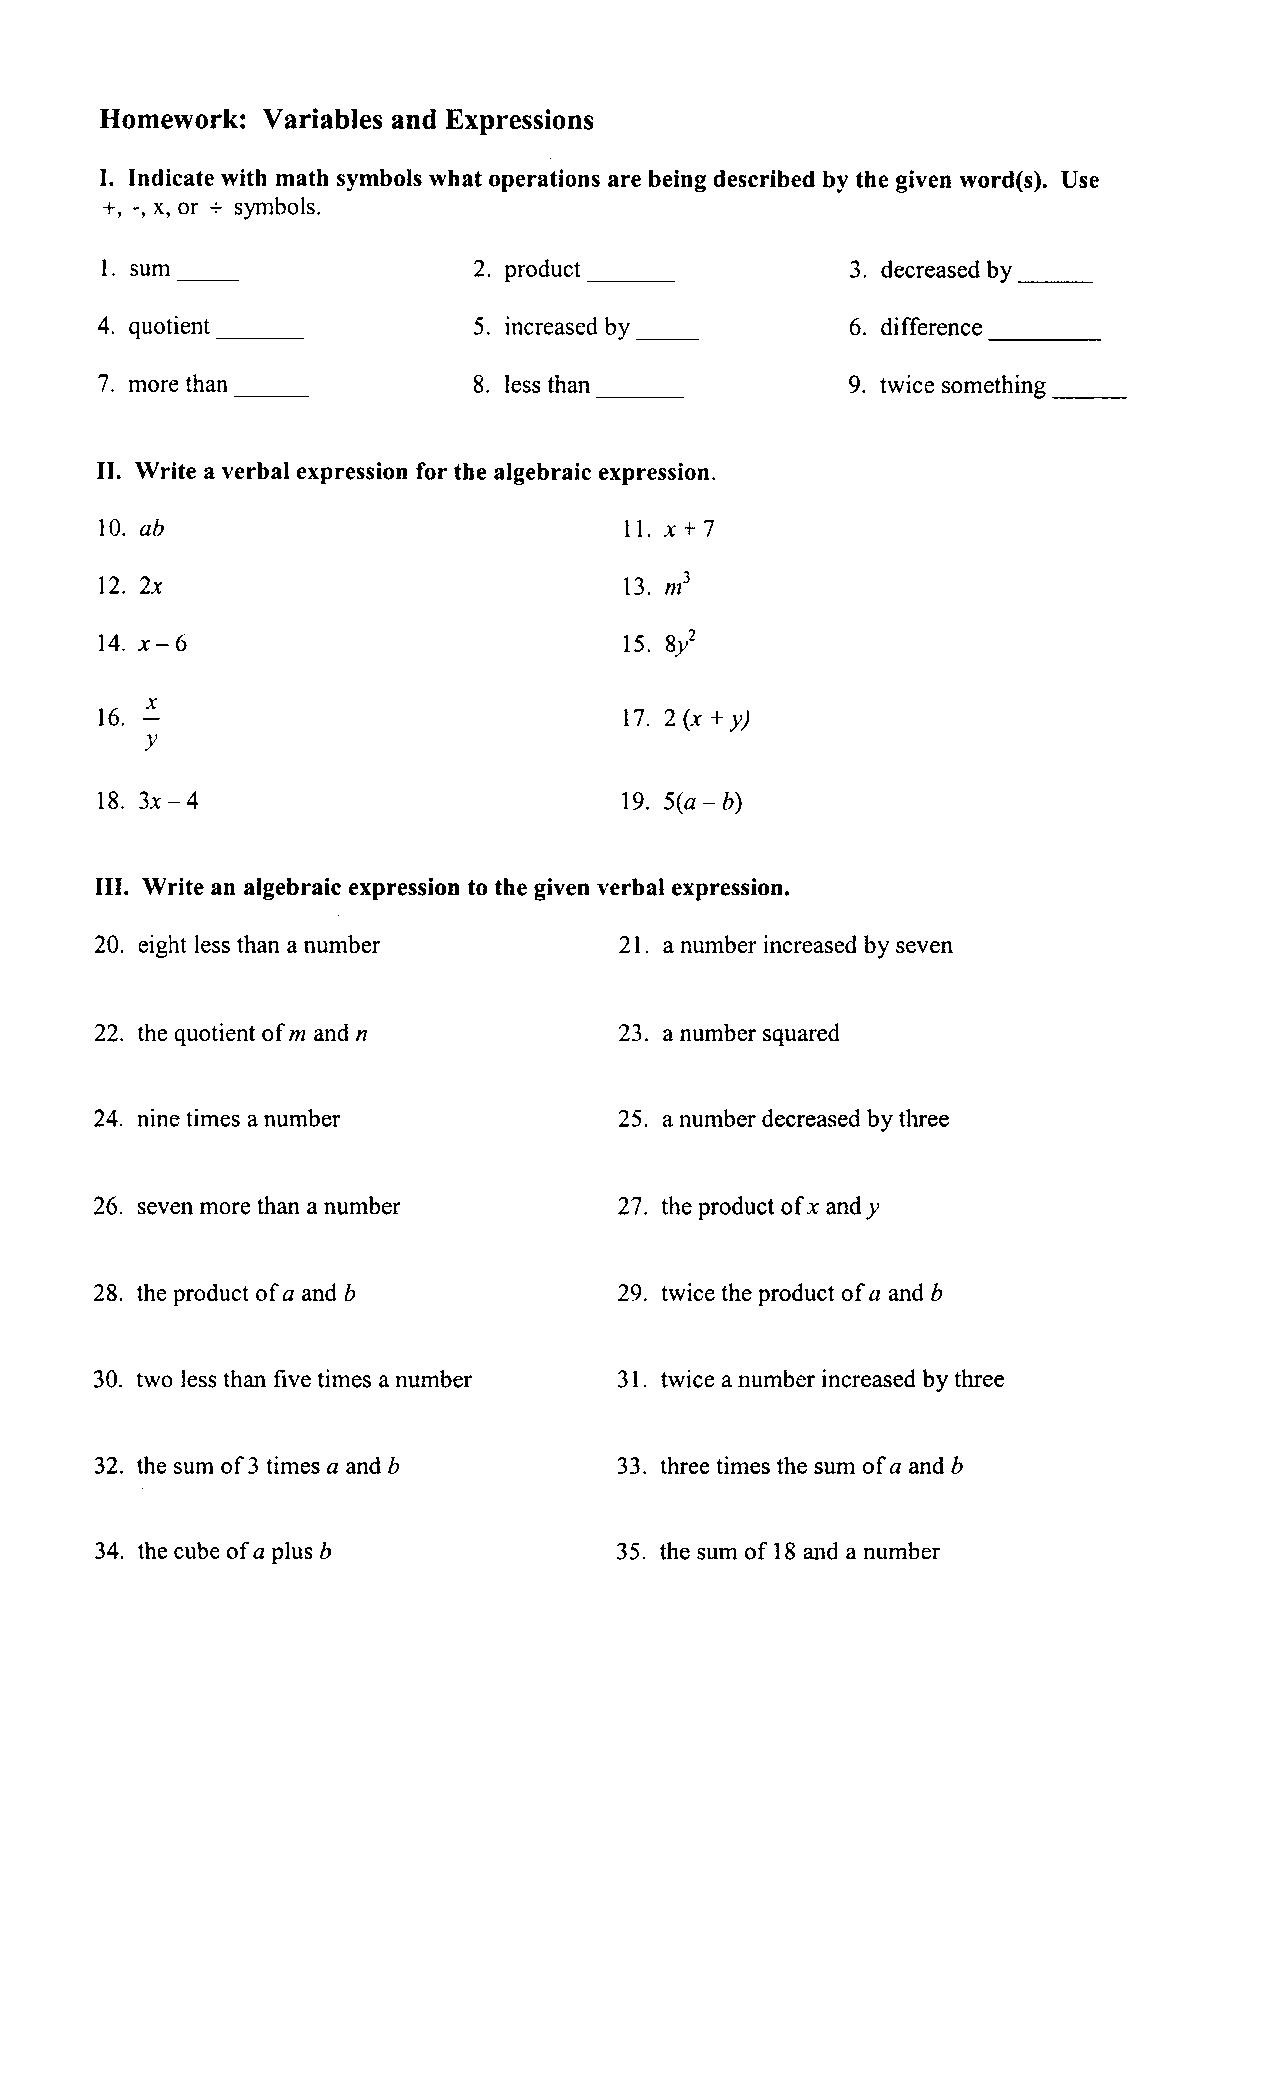 Writing Linear Equations Worksheet Answers Lovely Variables and Expressions Worksheet